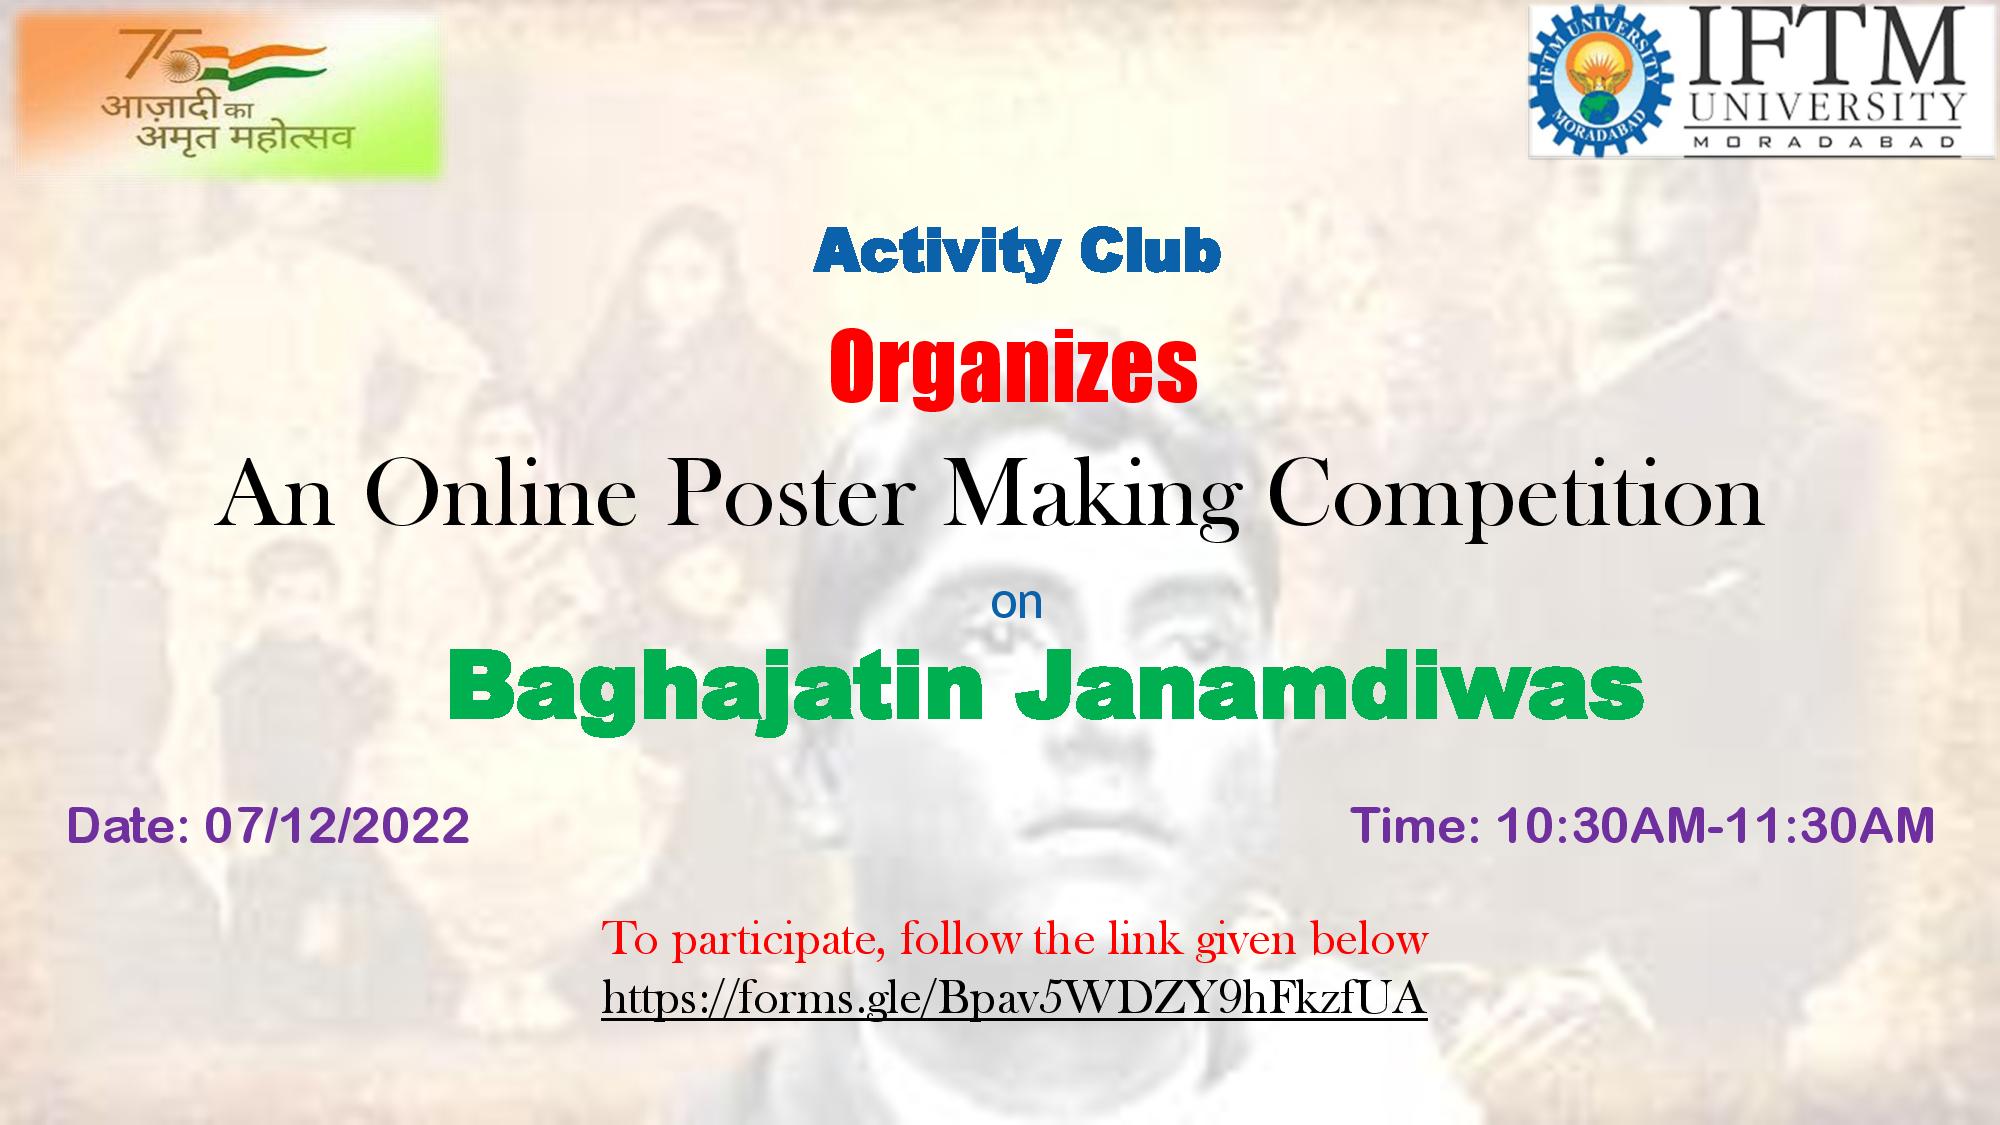 Poster Making competition on Baghajatin Janamdiwas